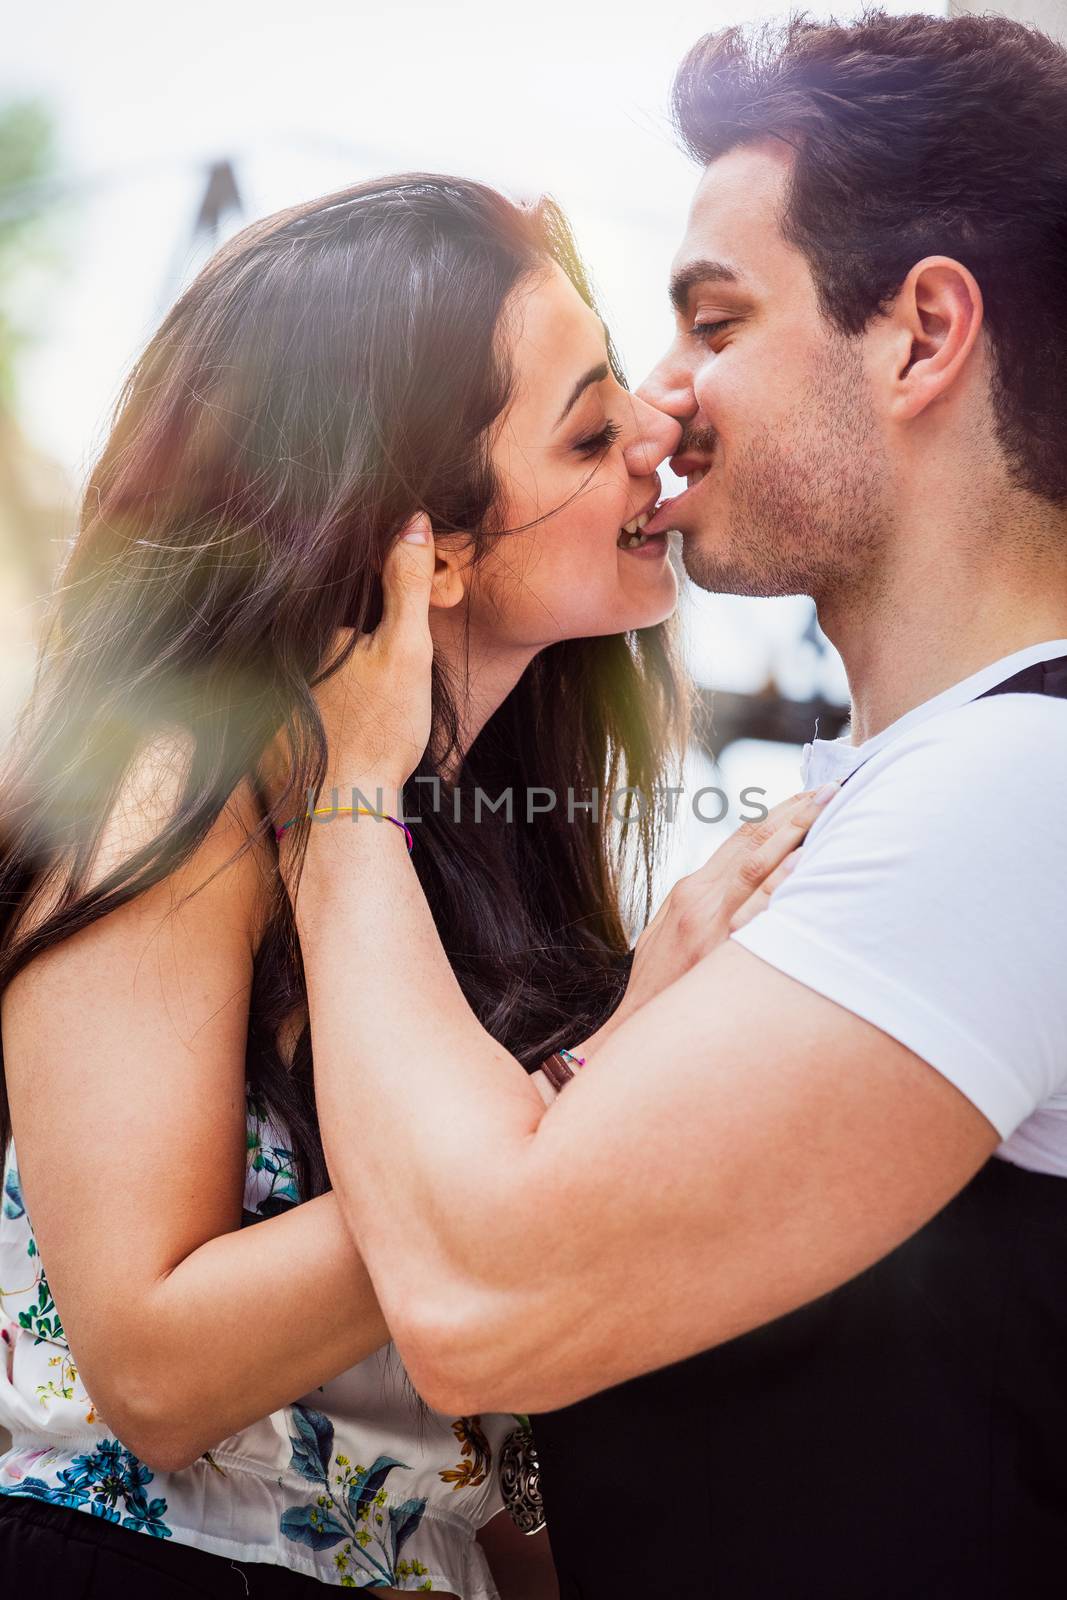 Loving couple girl kisses and bites the lip of her boyfriend. Intense love between two young people embracing each other.